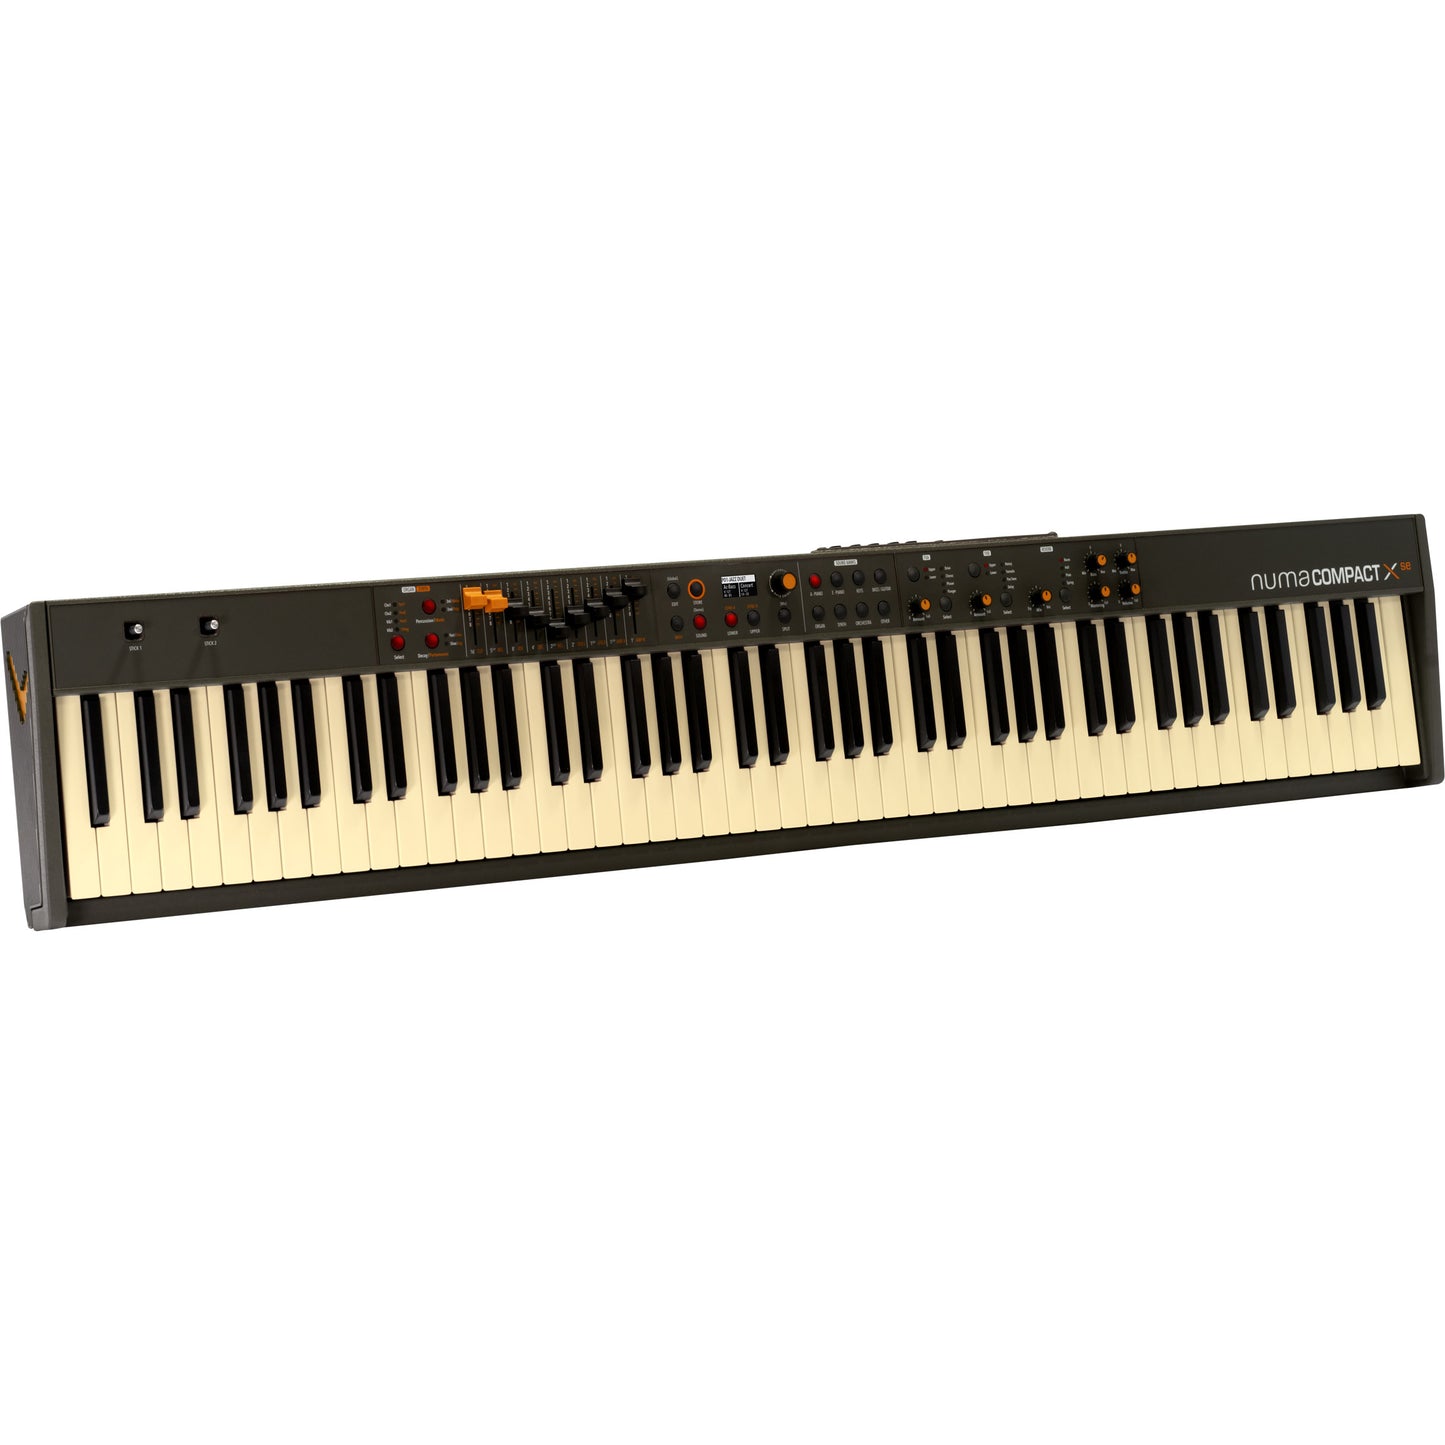 Studiologic Numa Compact X SE 88 Note Semi Weighted Keyboard with Aftertouch